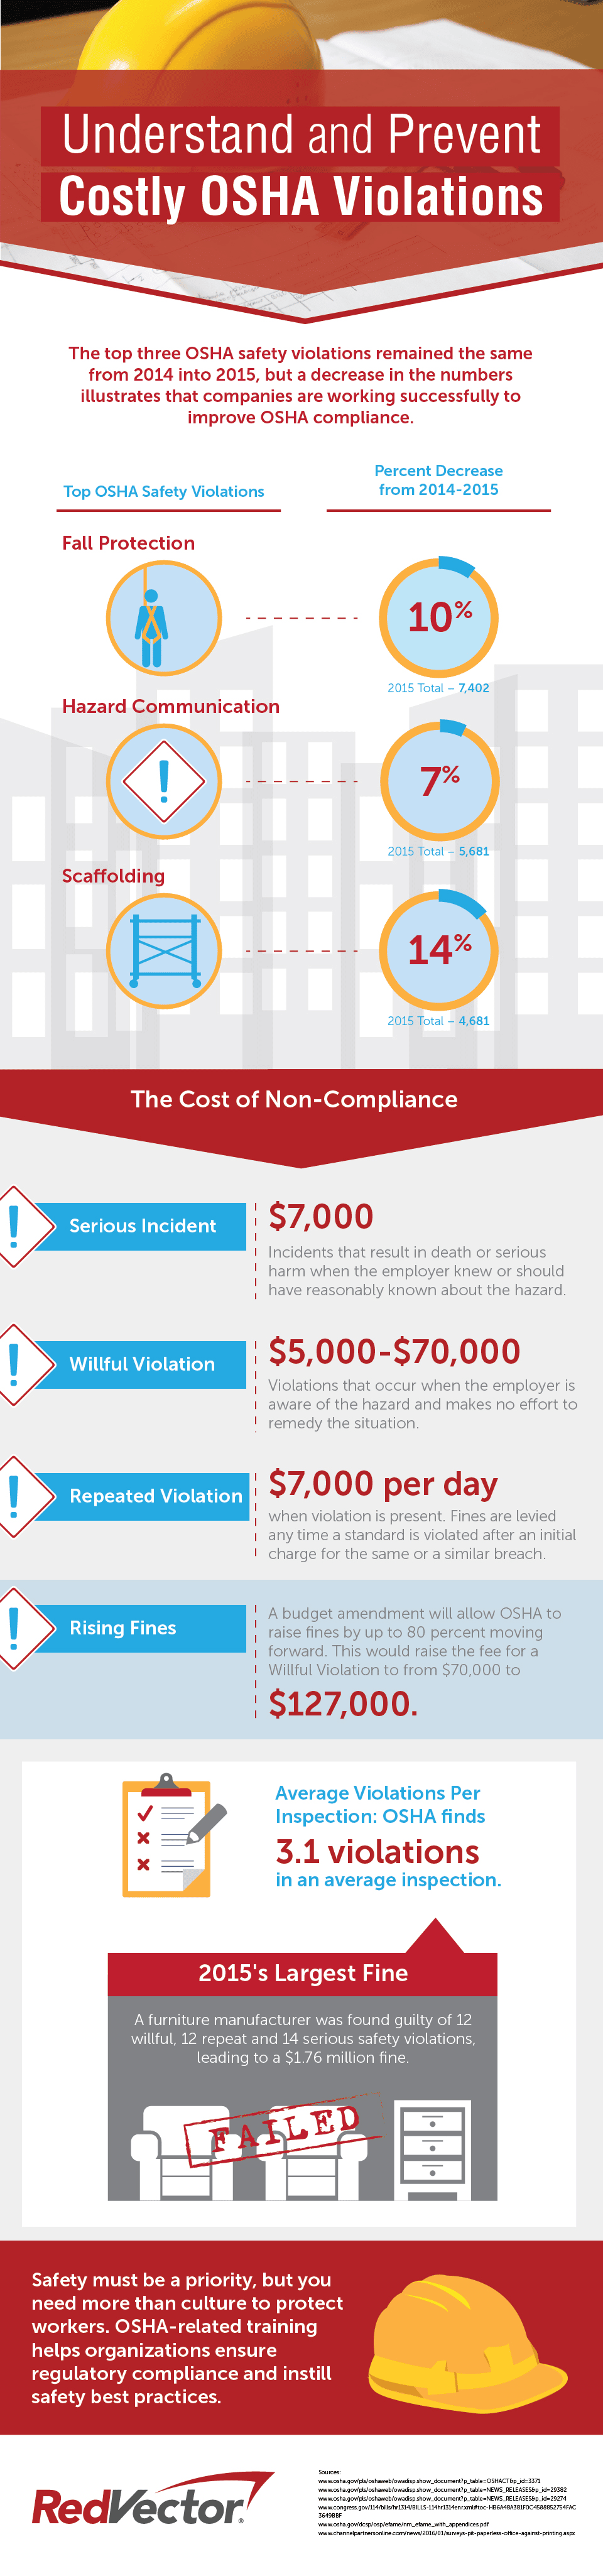 Understand and Prevent Costly OSHA Violations: Infographic